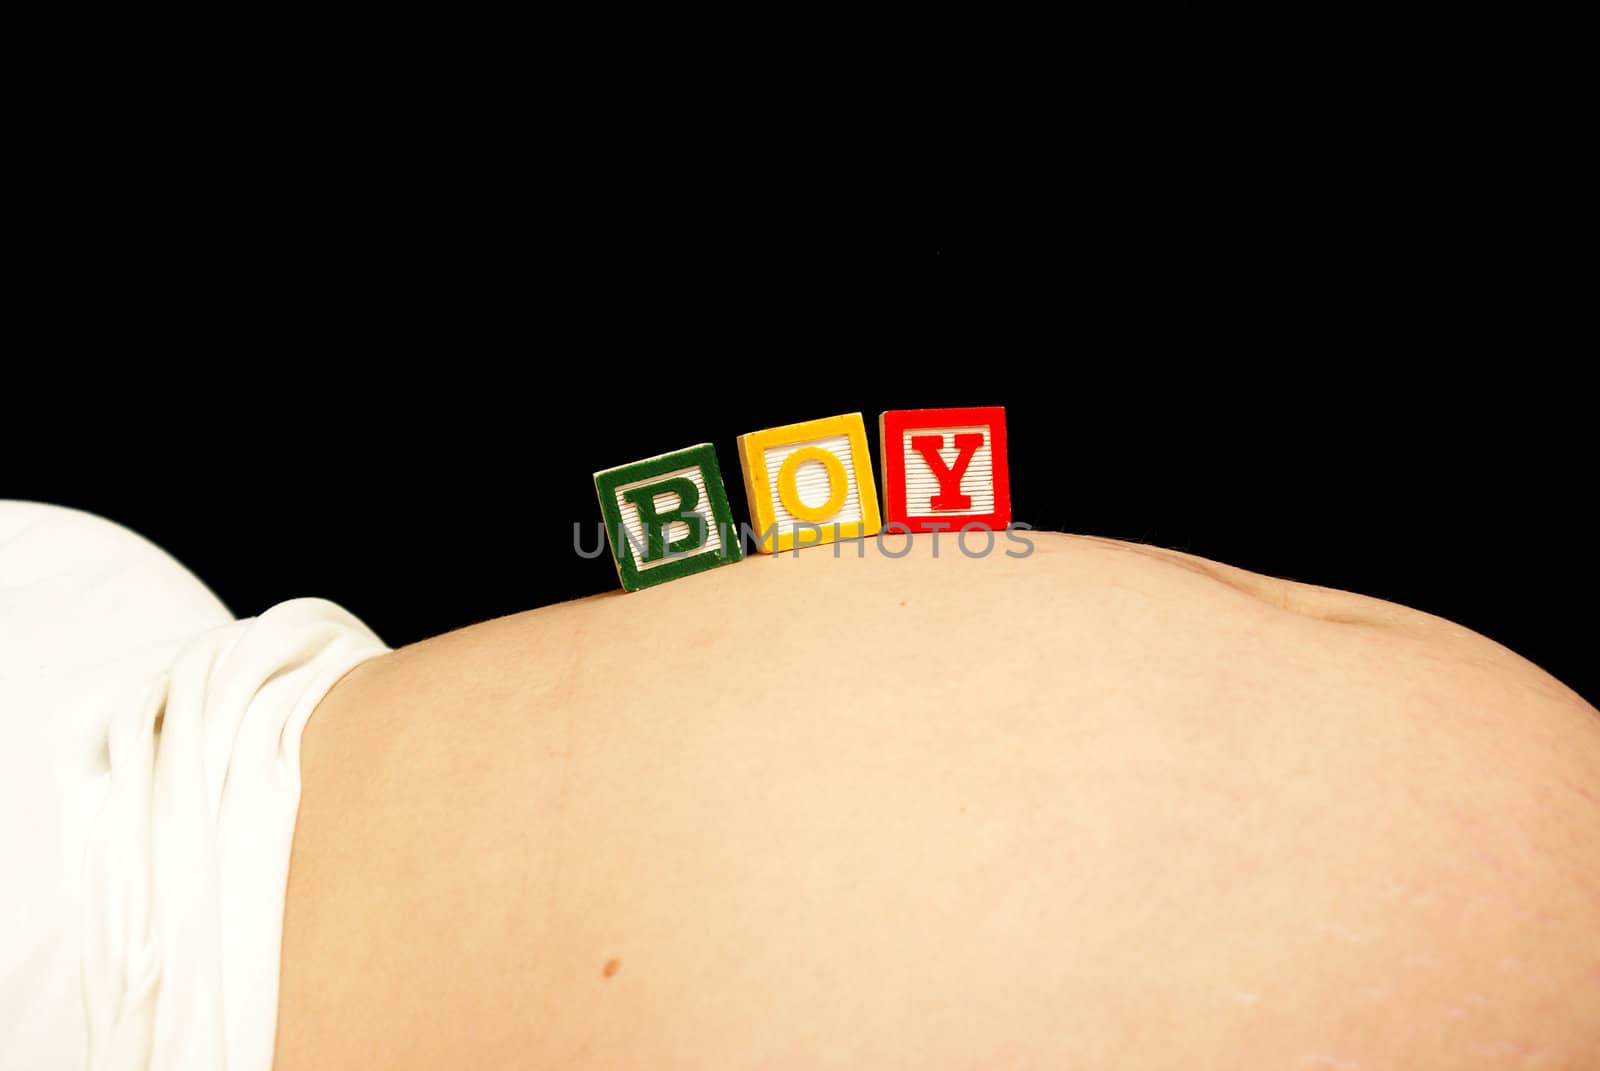 An expecting mother rests some baby blocks on her pregnant belly that spell out the word boy.